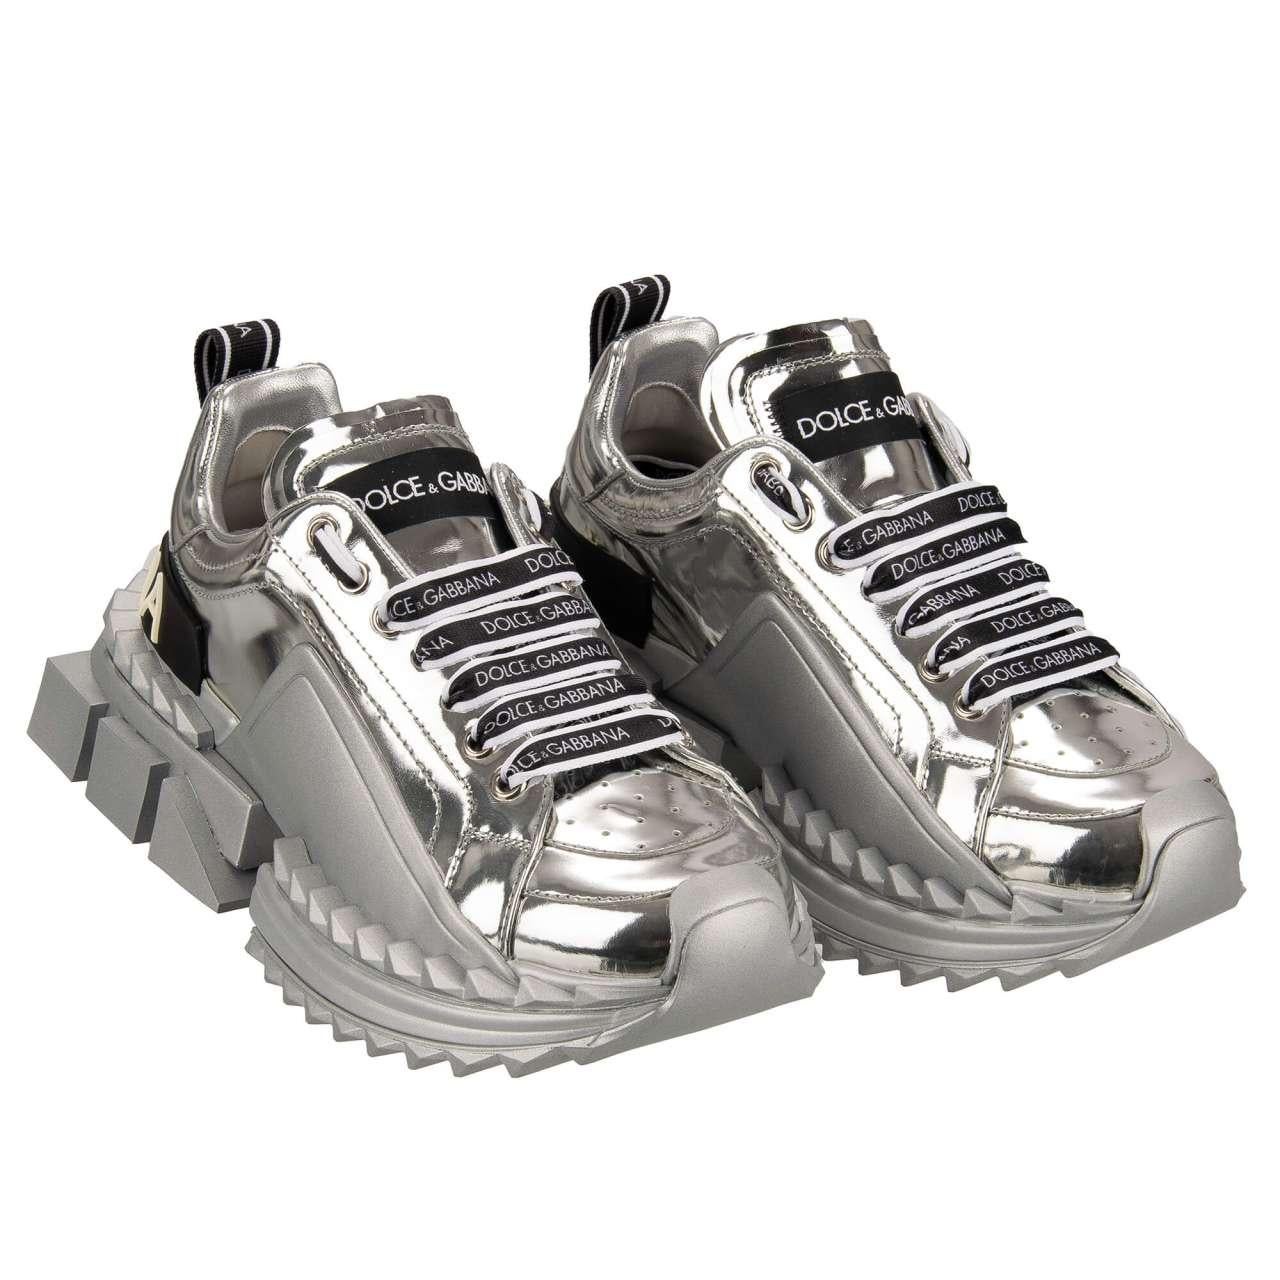 - Lace Sneaker SUPER QUEEN with plateau and DG logo in silver by DOLCE & GABBANA - New with Box - MADE IN ITALY - Former RRP: EUR 895 - Model: CK1649-AK701-8G718 - Material: 57% Calf leather, 43% Rubber - Sole: Rubber - Color: Silver - Dolce&Gabbana